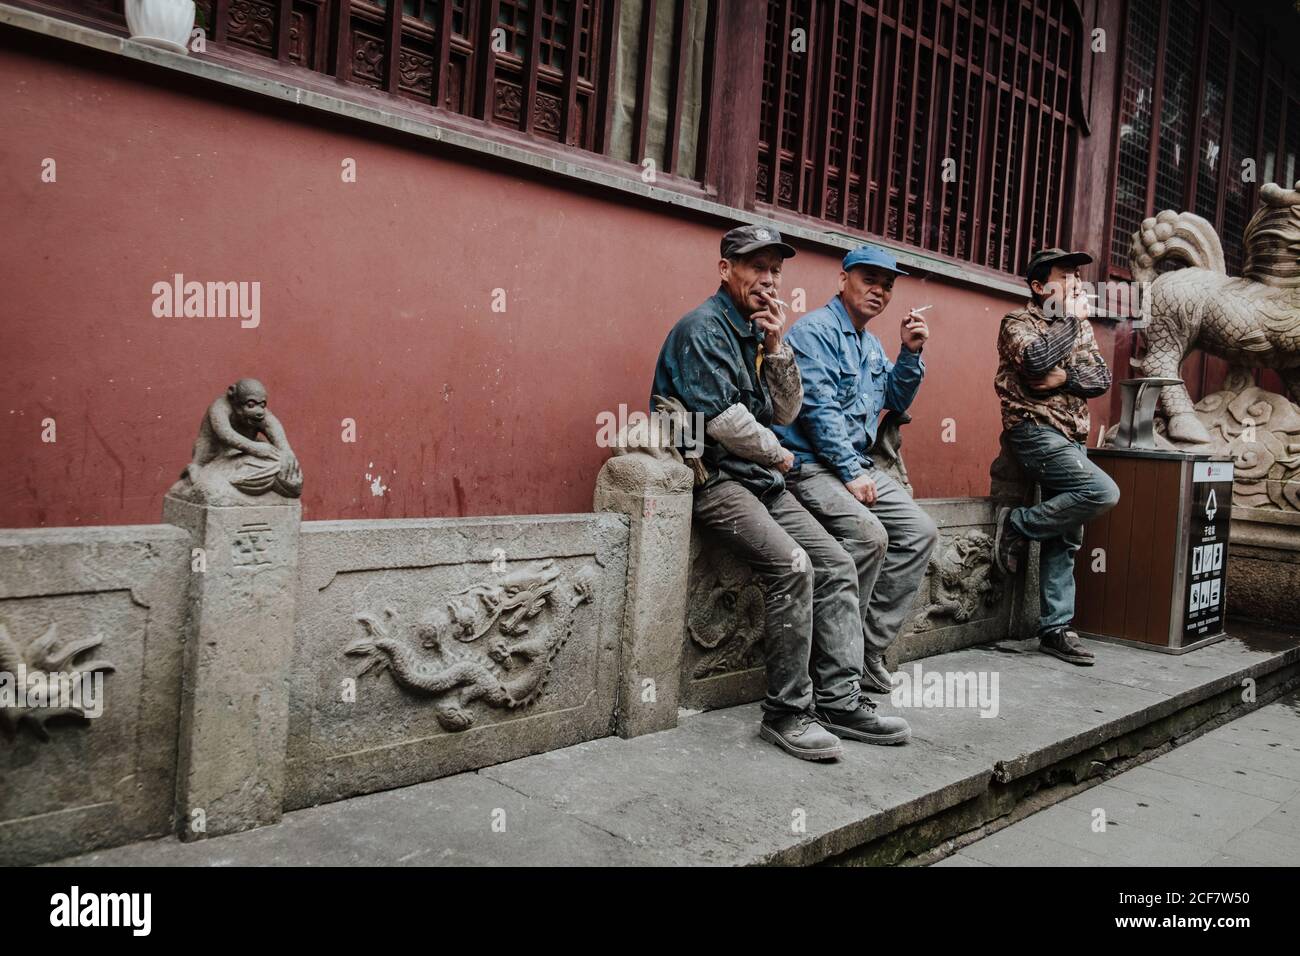 Shanghai, China - 12 December, 2018: Group of adult Chinese male workers having break and smoking while sitting on stone fence next to building with red wall Stock Photo